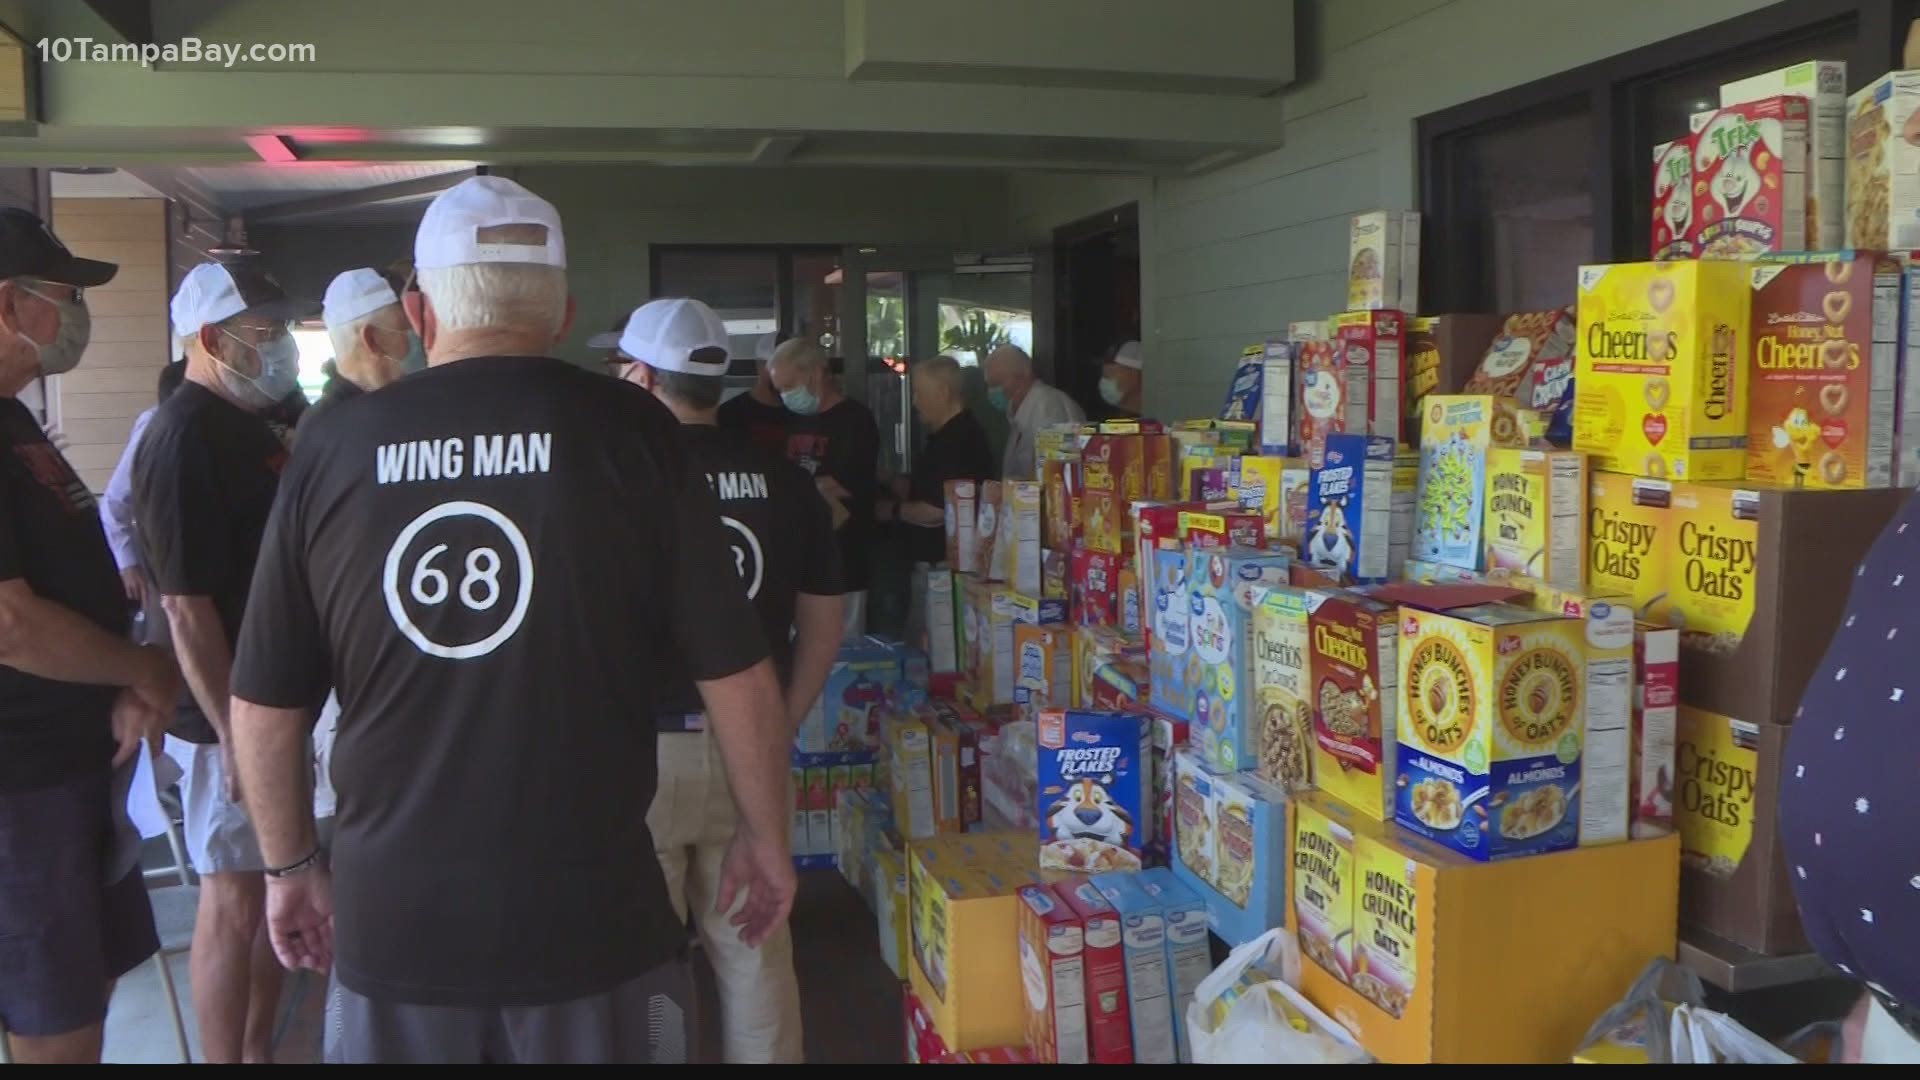 More than 800 boxes of cereal were donated to 10 Tampa Bay's Cereal for Summer drive thanks to one group's generosity.